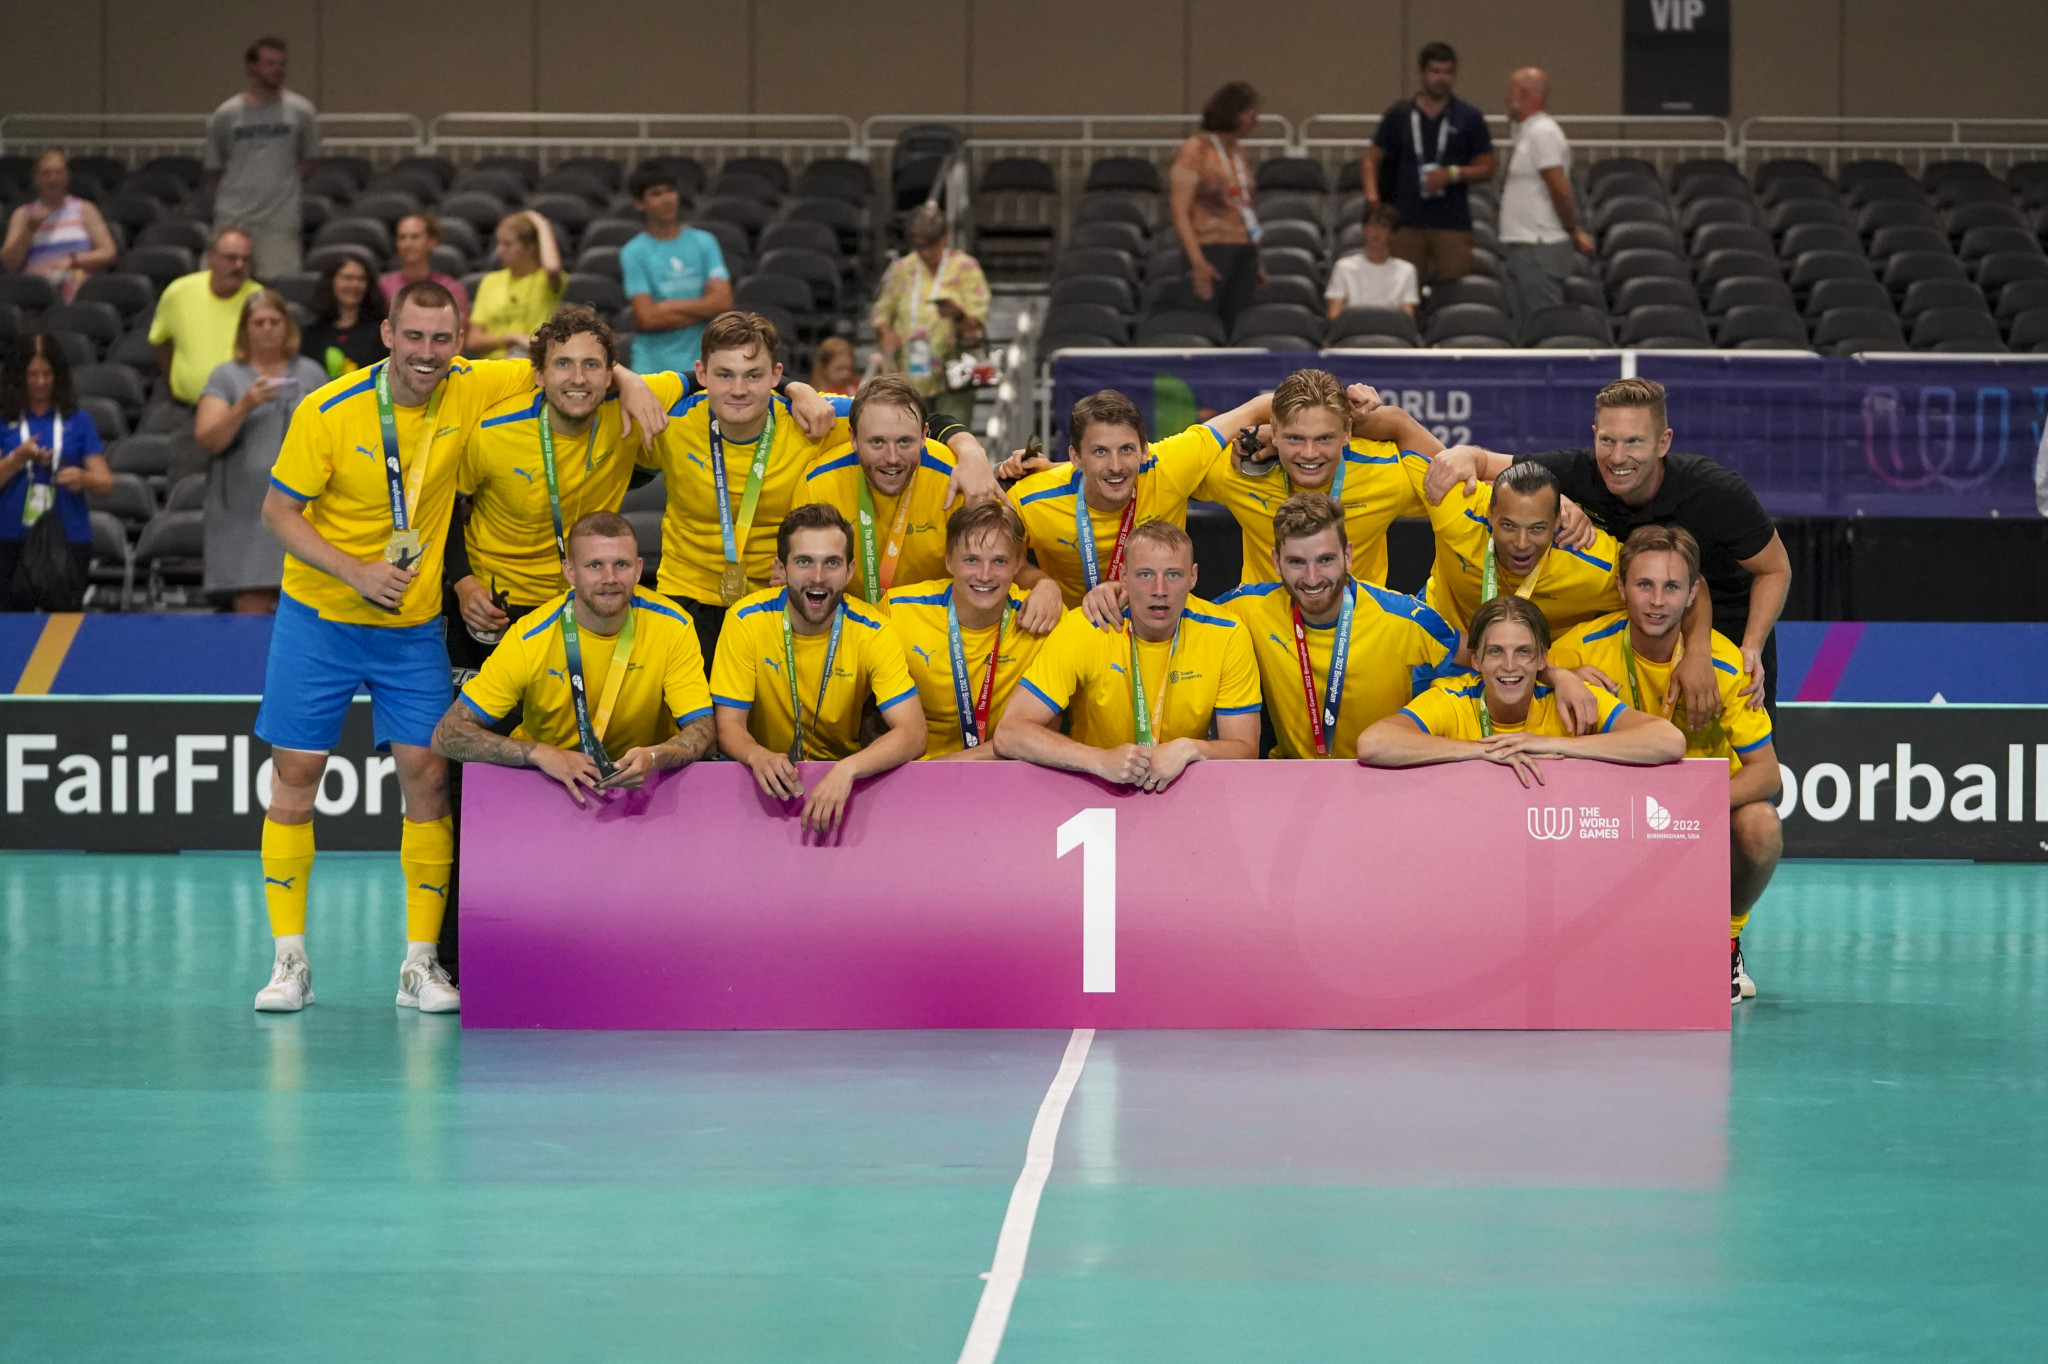 Sweden added Birmingham 2022 World Games gold to their victory at the last Men's Floorball World Championship ©Marvin Gentry/The World Games 2022